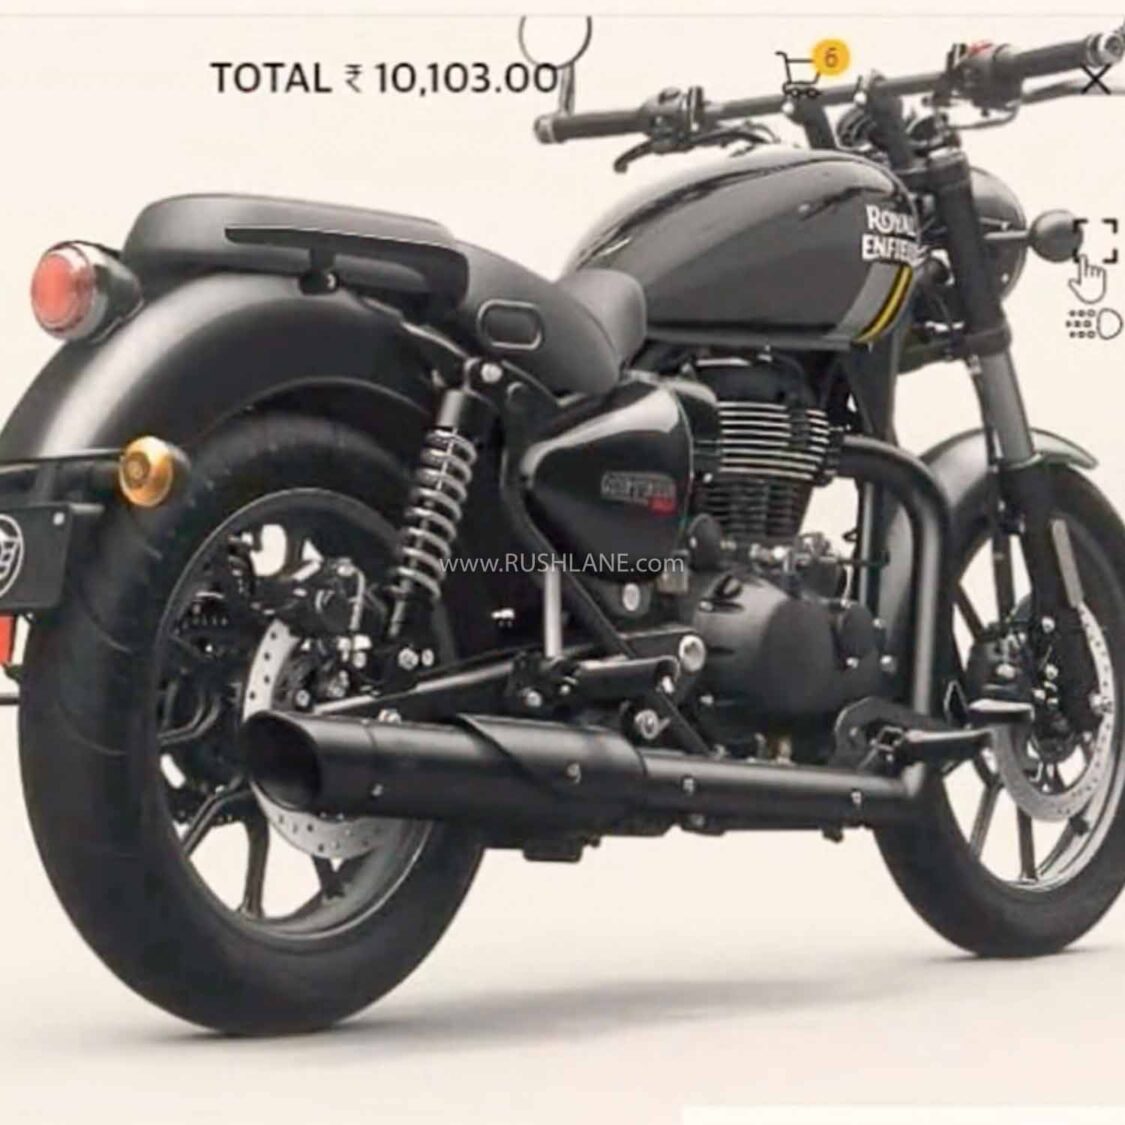 Royal Enfield Meteor 350 To Launch After New Honda Rebel Cruiser